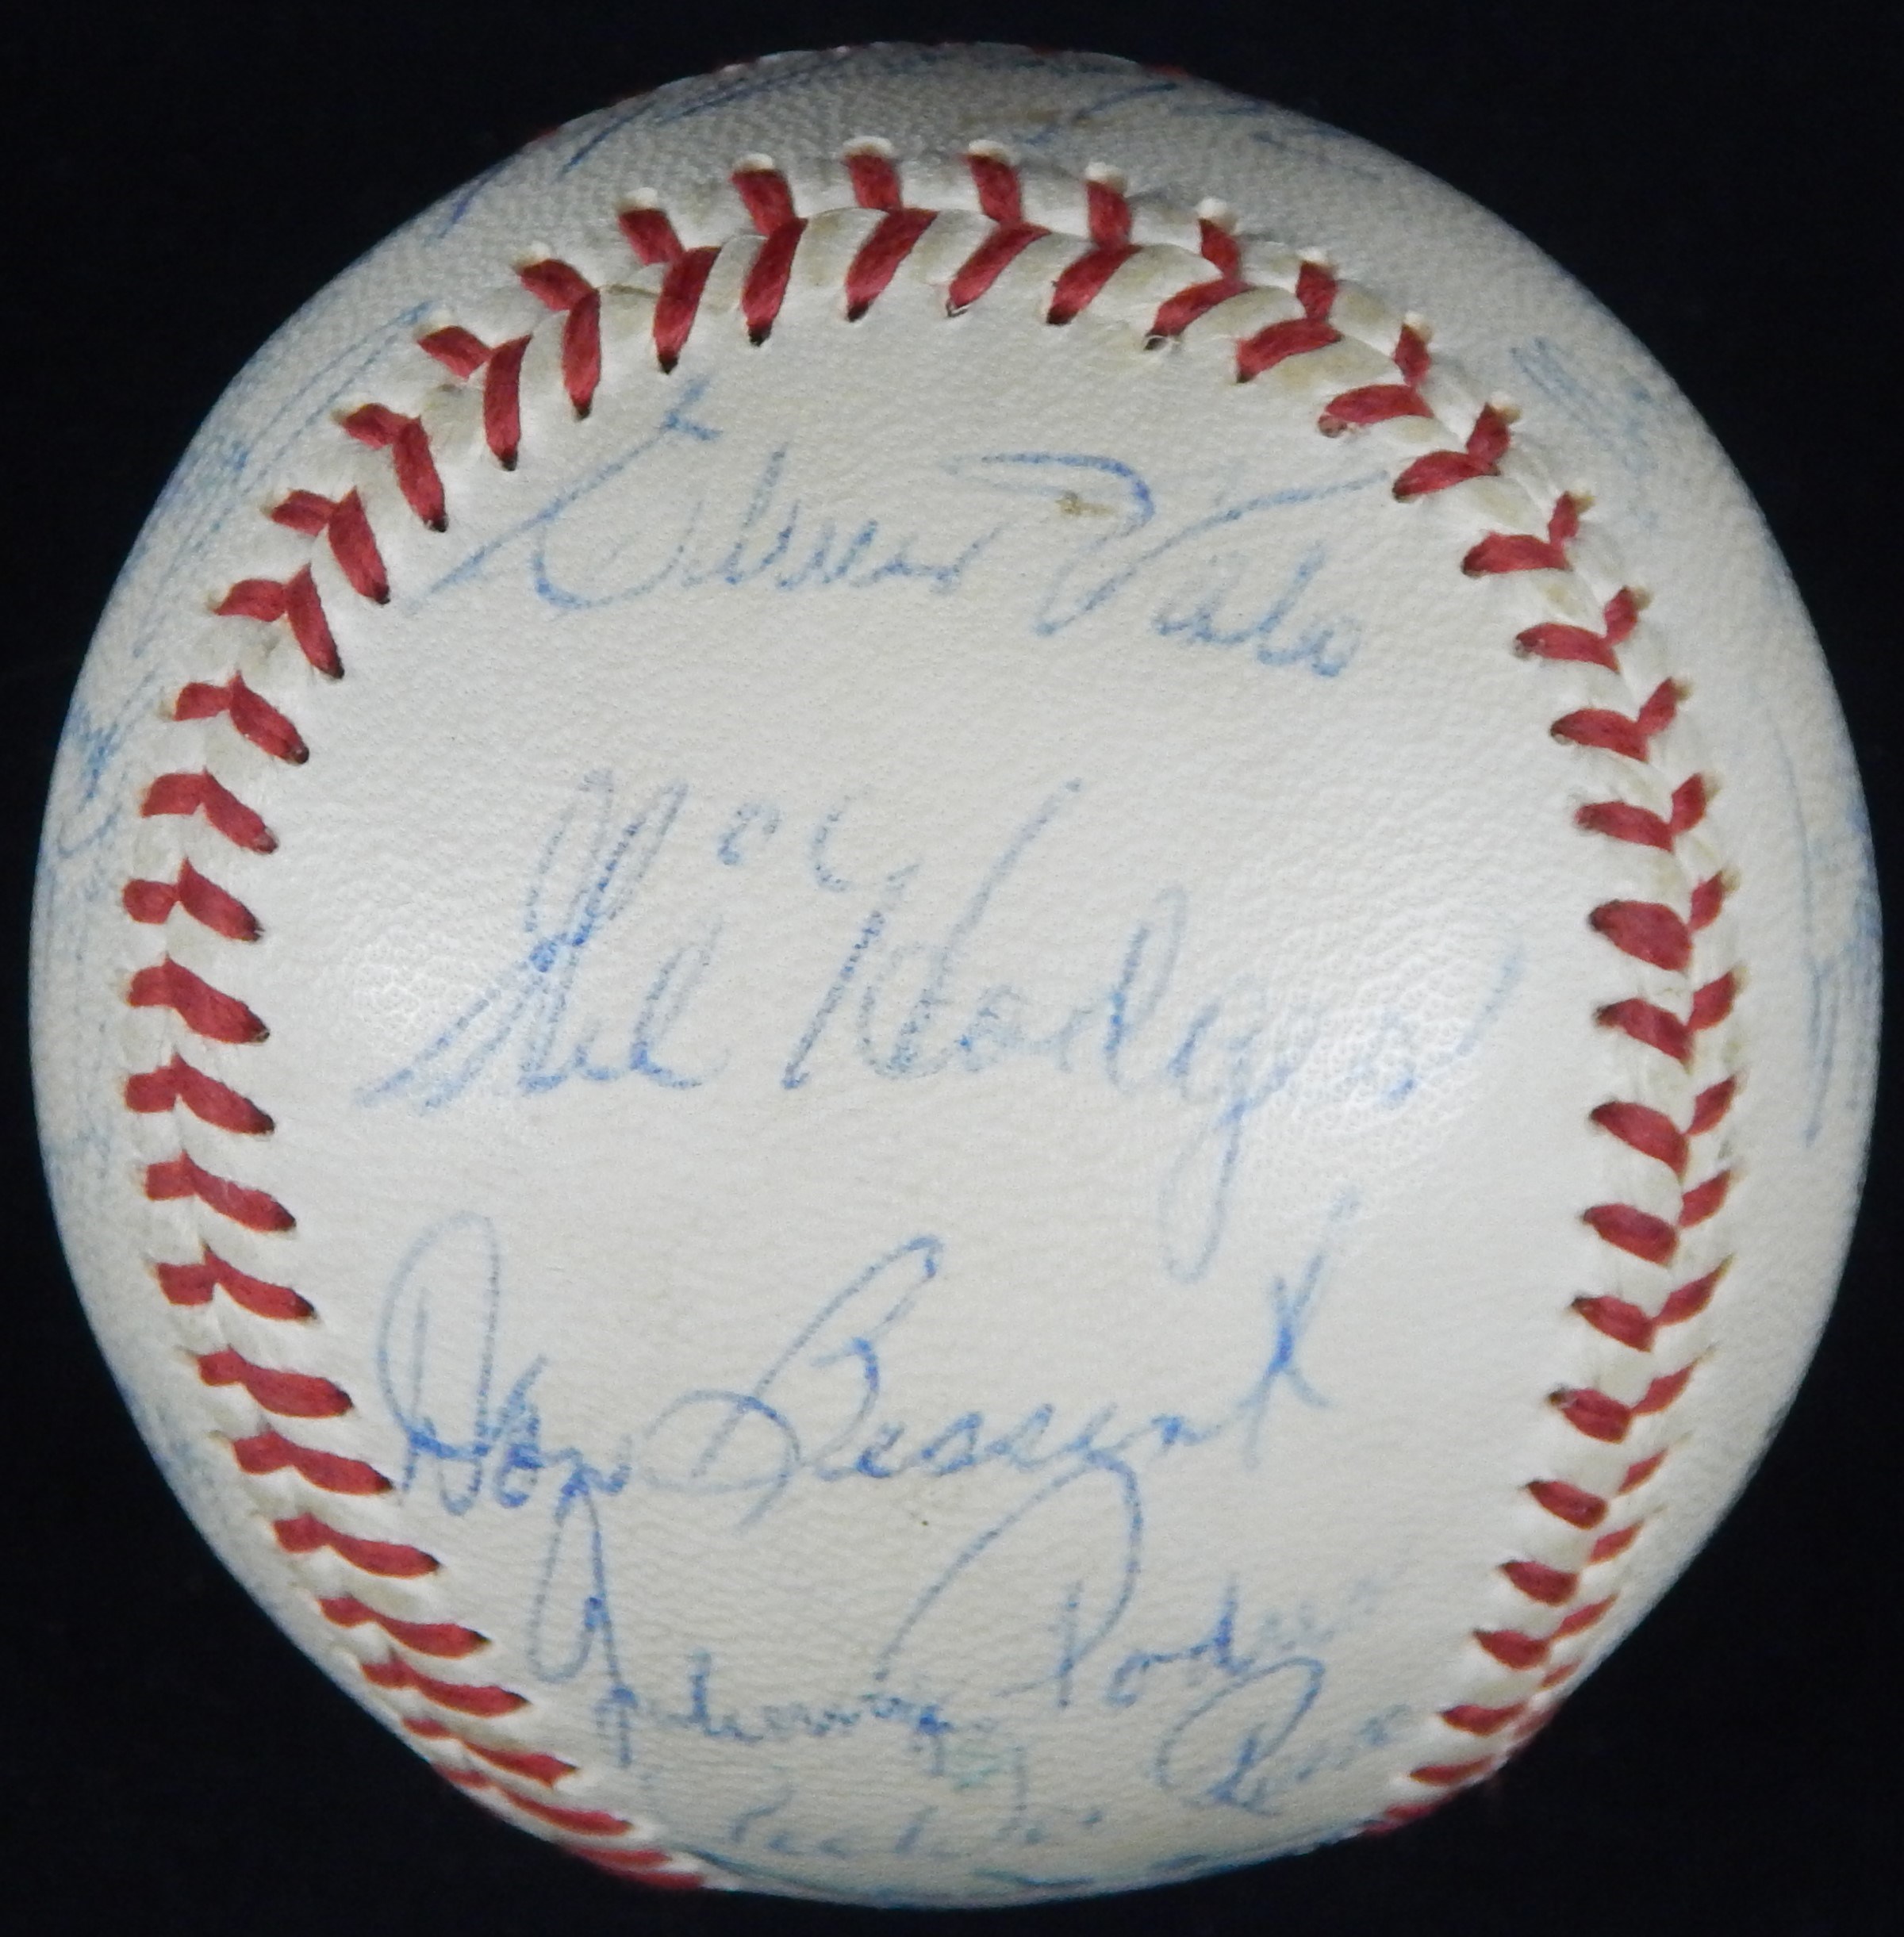 - 1958 Los Angeles Dodgers Team Signed Baseball with 24 Signatures